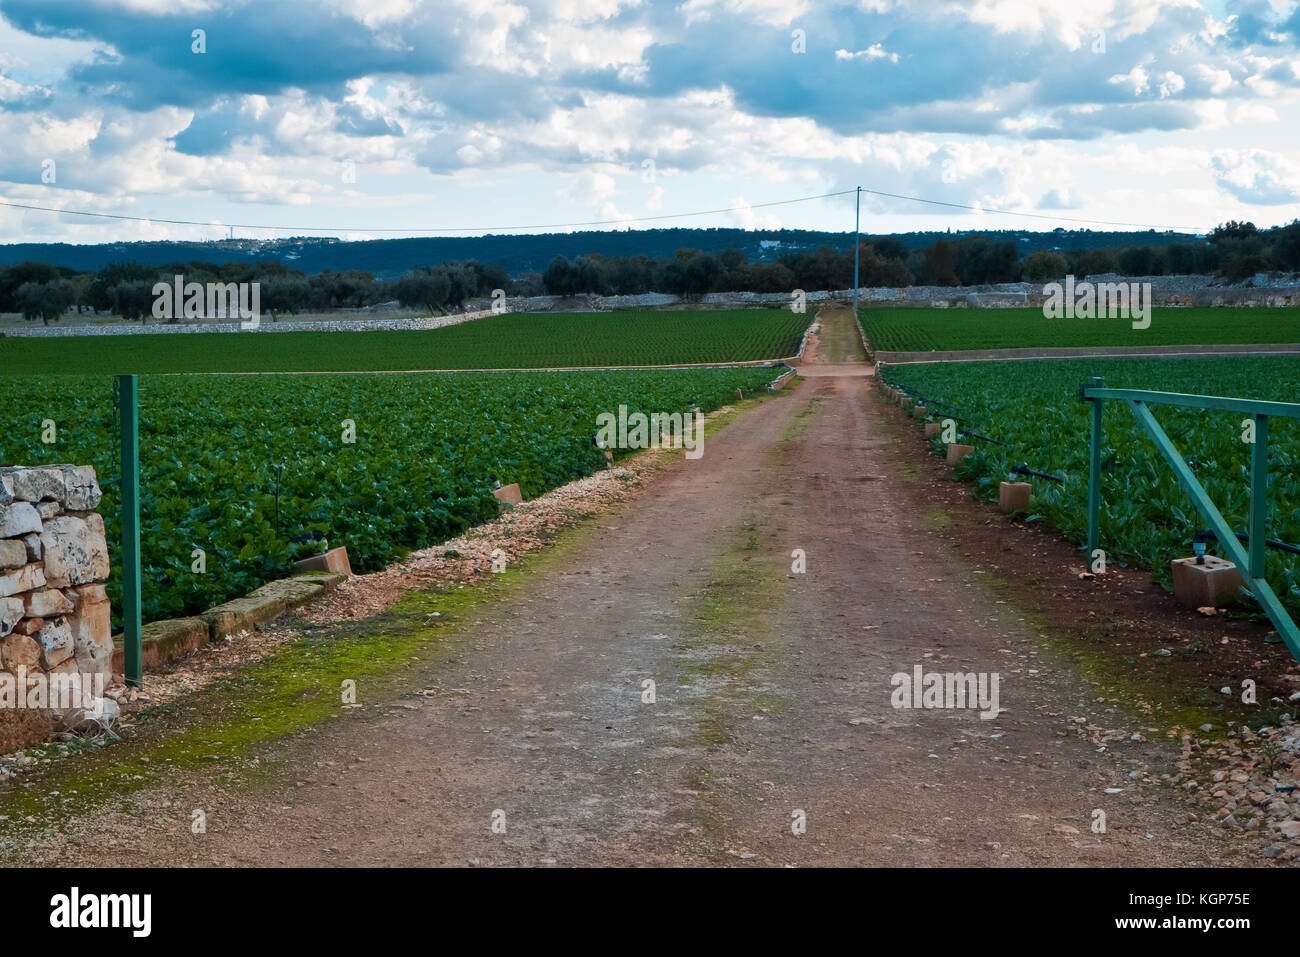 Vegetables growing in autumn of Puglia . Stock Photo